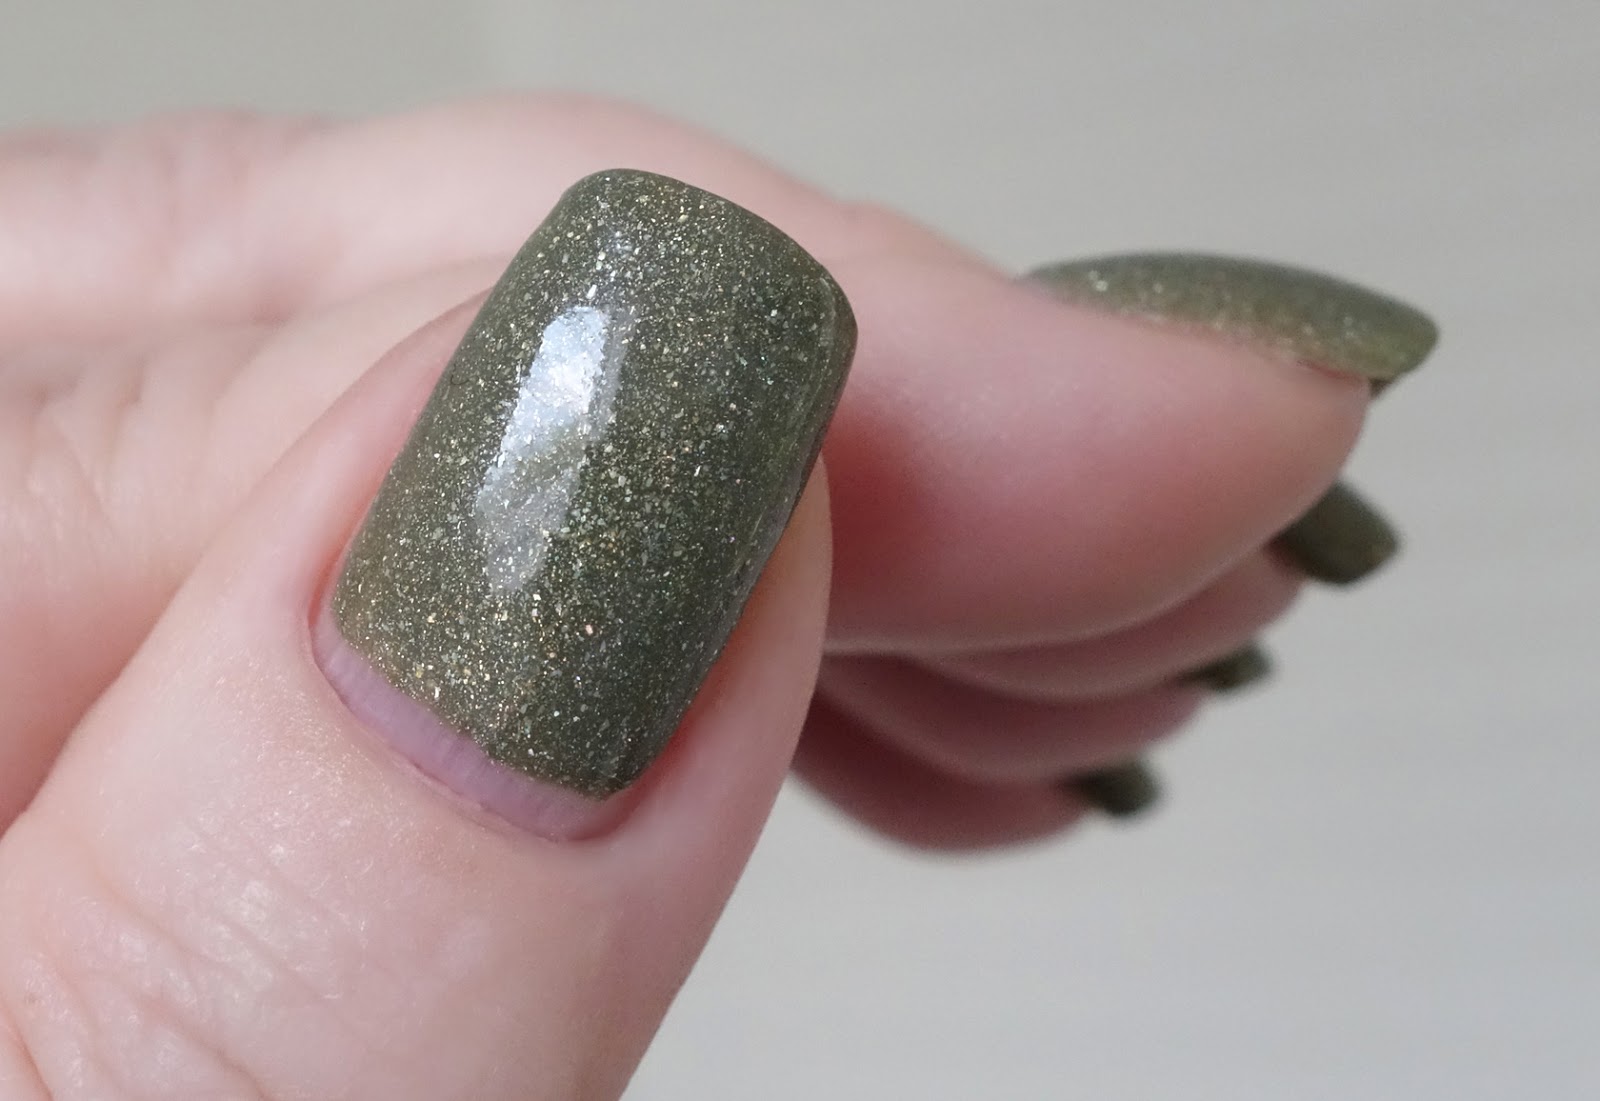 4. China Glaze Nail Lacquer in "Succulent" - wide 1